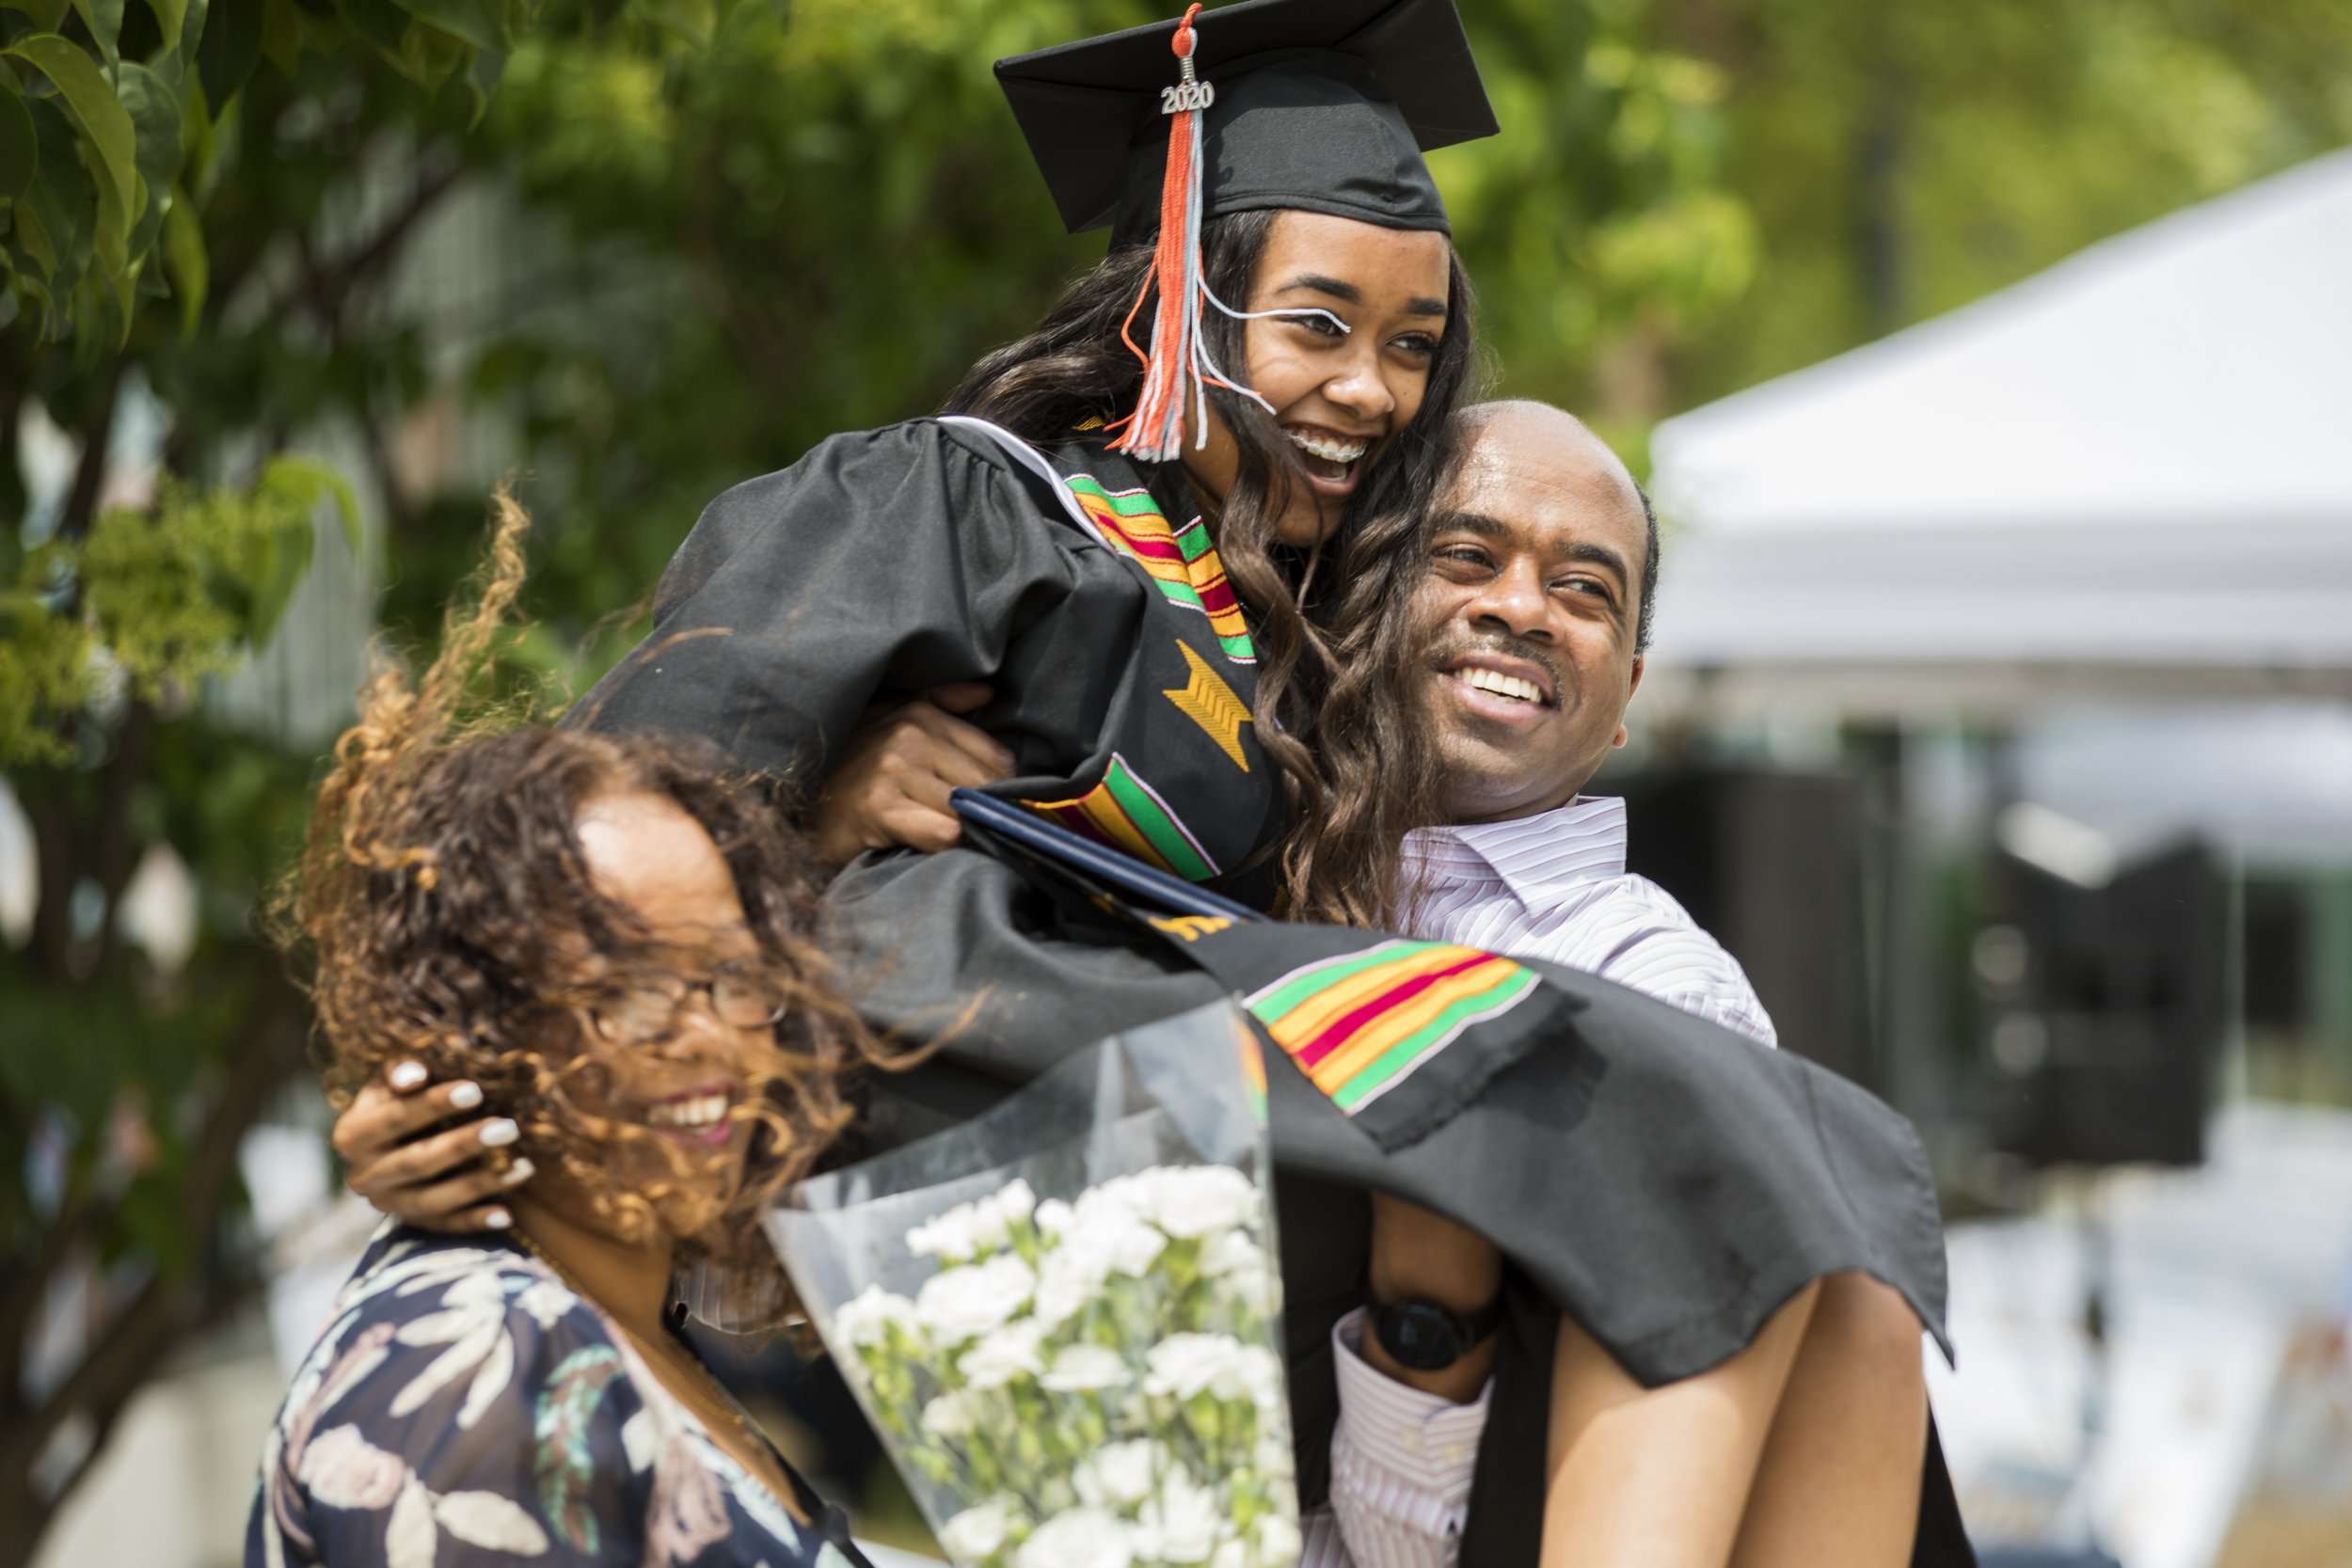  Hamartii Hailu is lifted by her father while receiving her diploma during a social distancing drive-up graduation ceremony at Cristo Rey Jesuit High School in Minneapolis on Saturday afternoon, June 6, 2020. (Liam James Doyle for MPR News) 